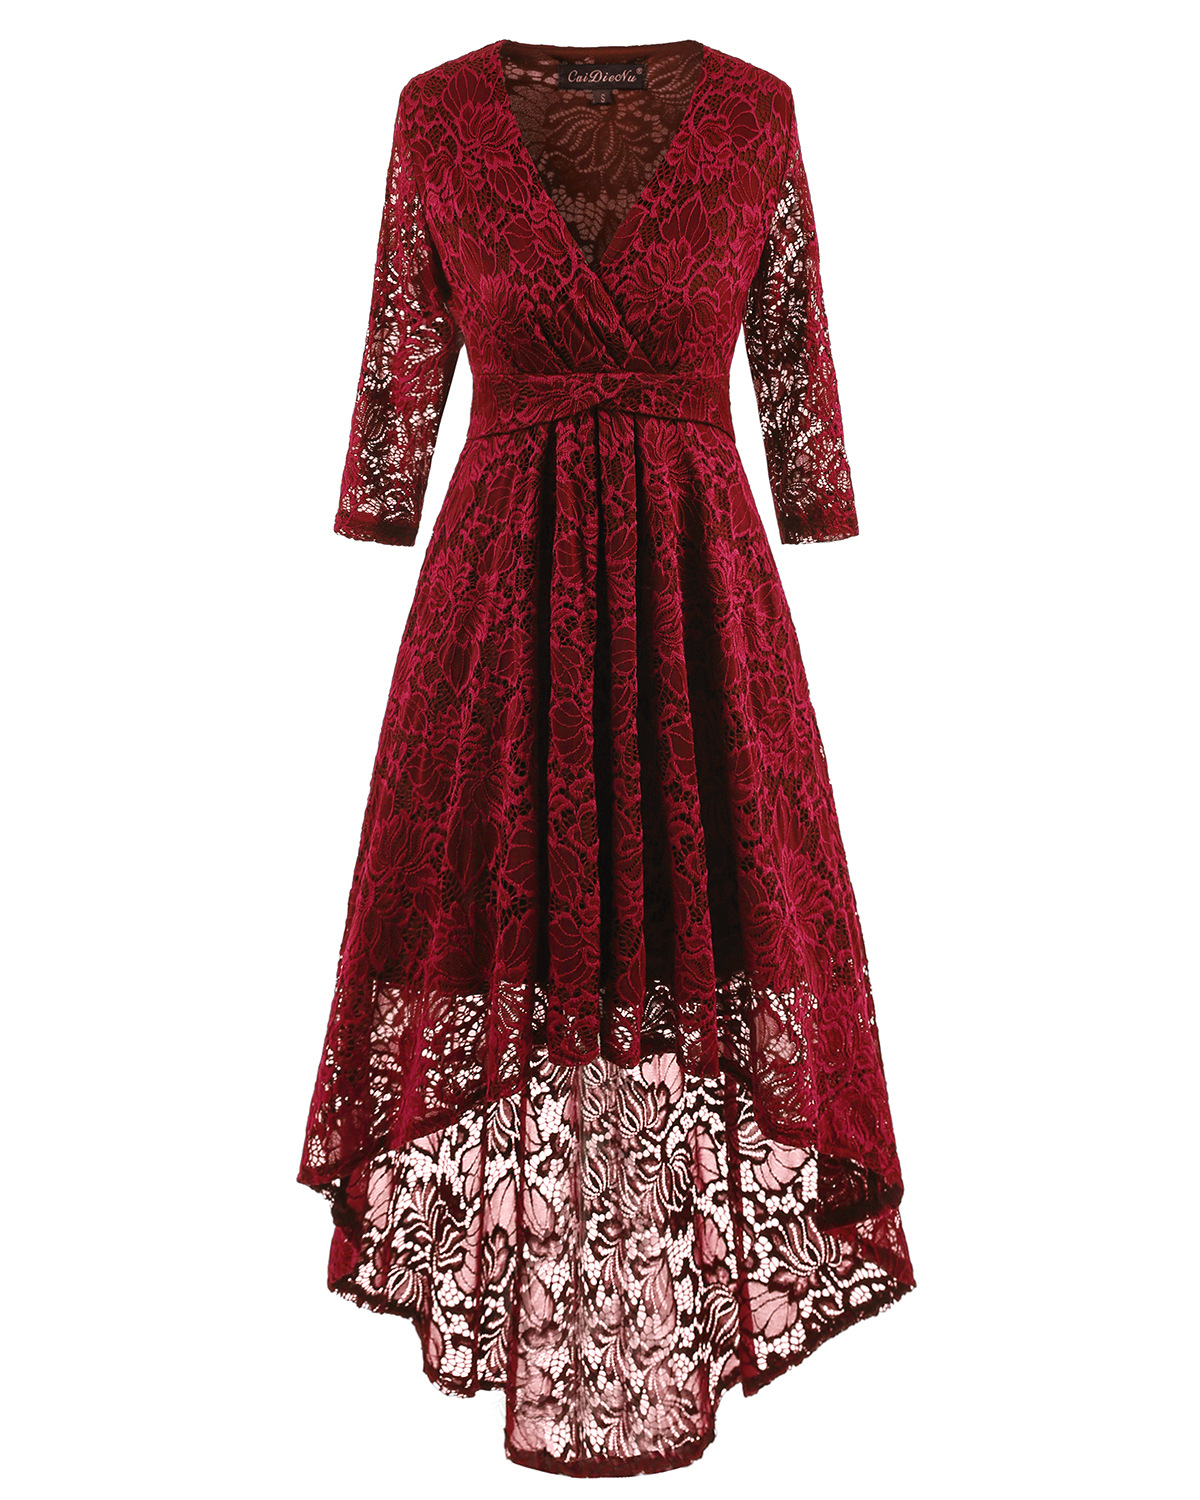 Women Half Sleeve Deep V Neck High Low Irregular Lace Party Dresses - Wine Red